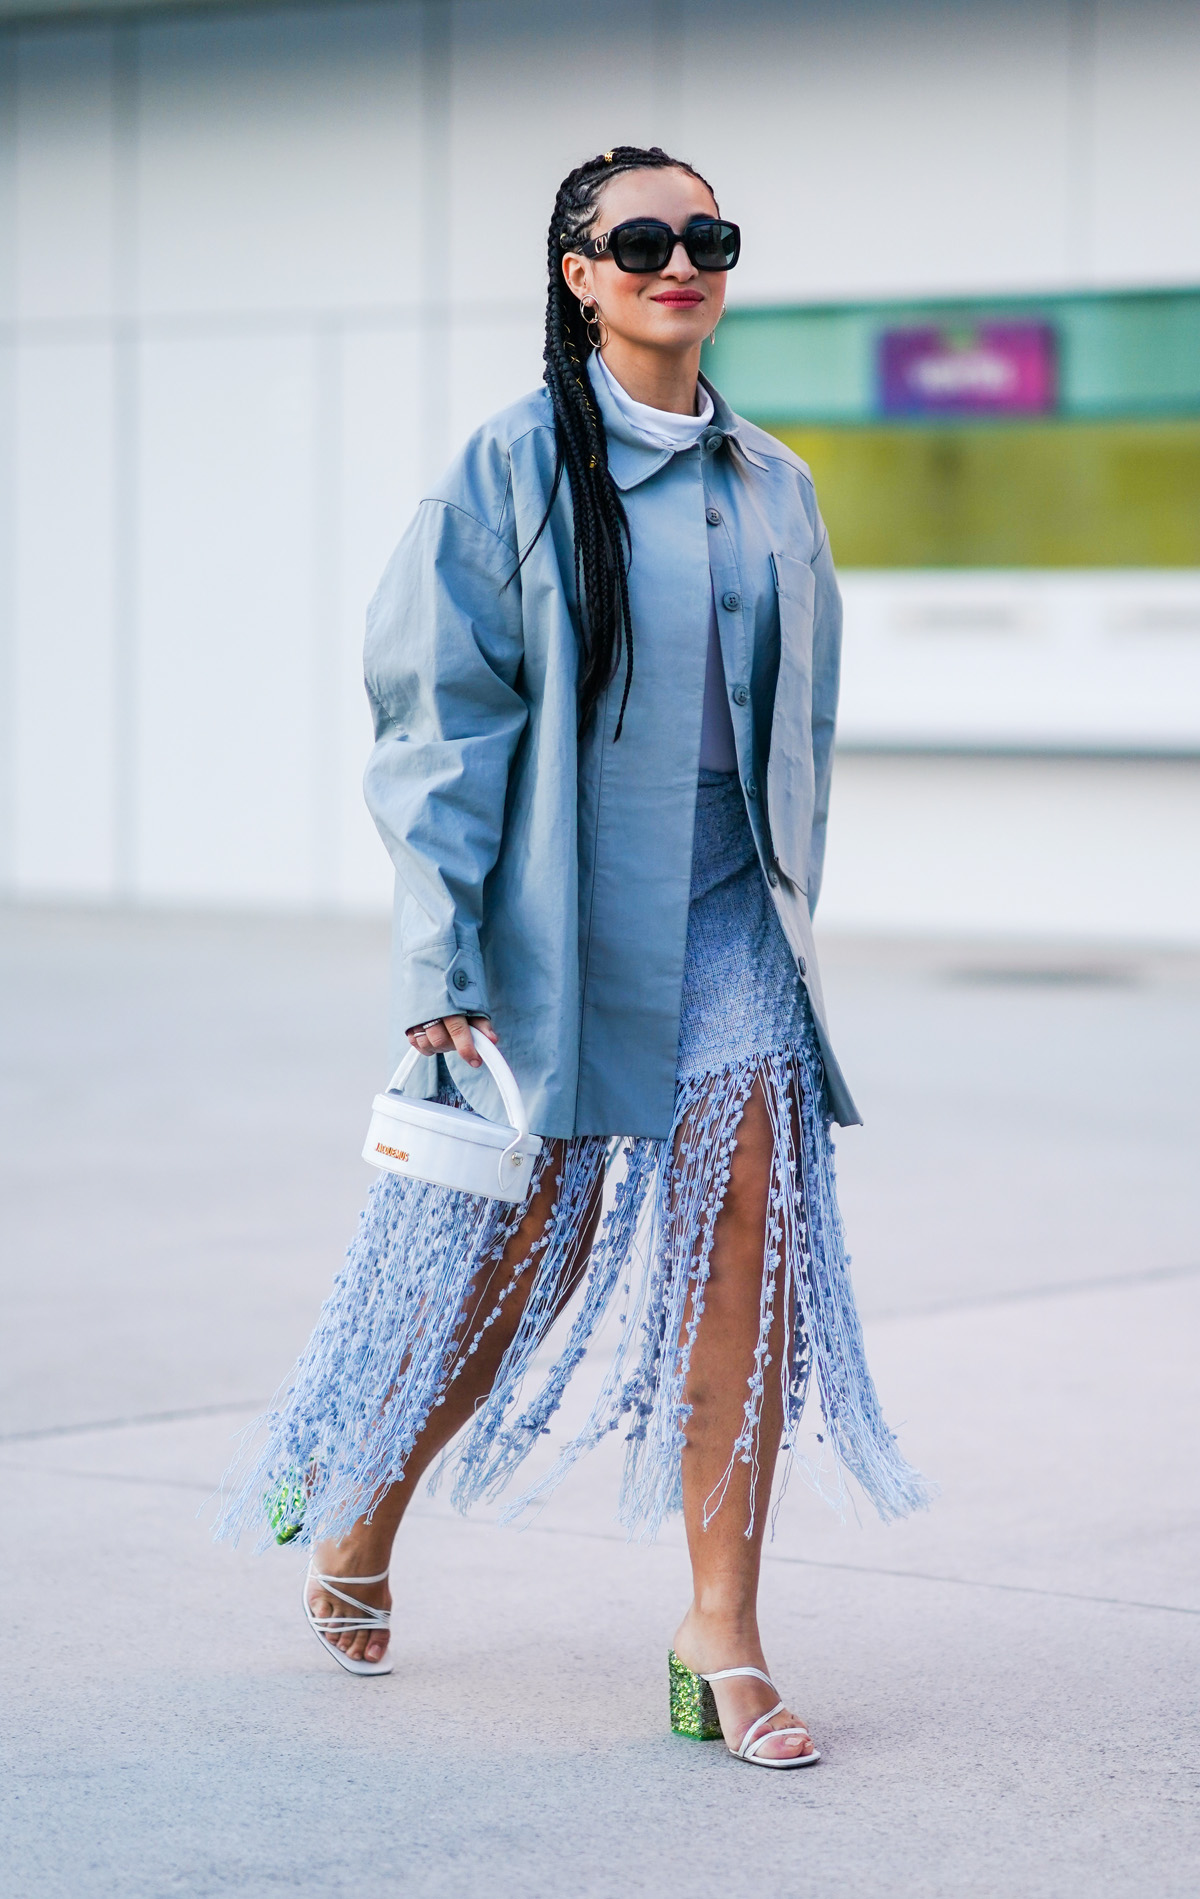 The Very Best Street Style Outfits of 2020 So Far | Who What Wear UK